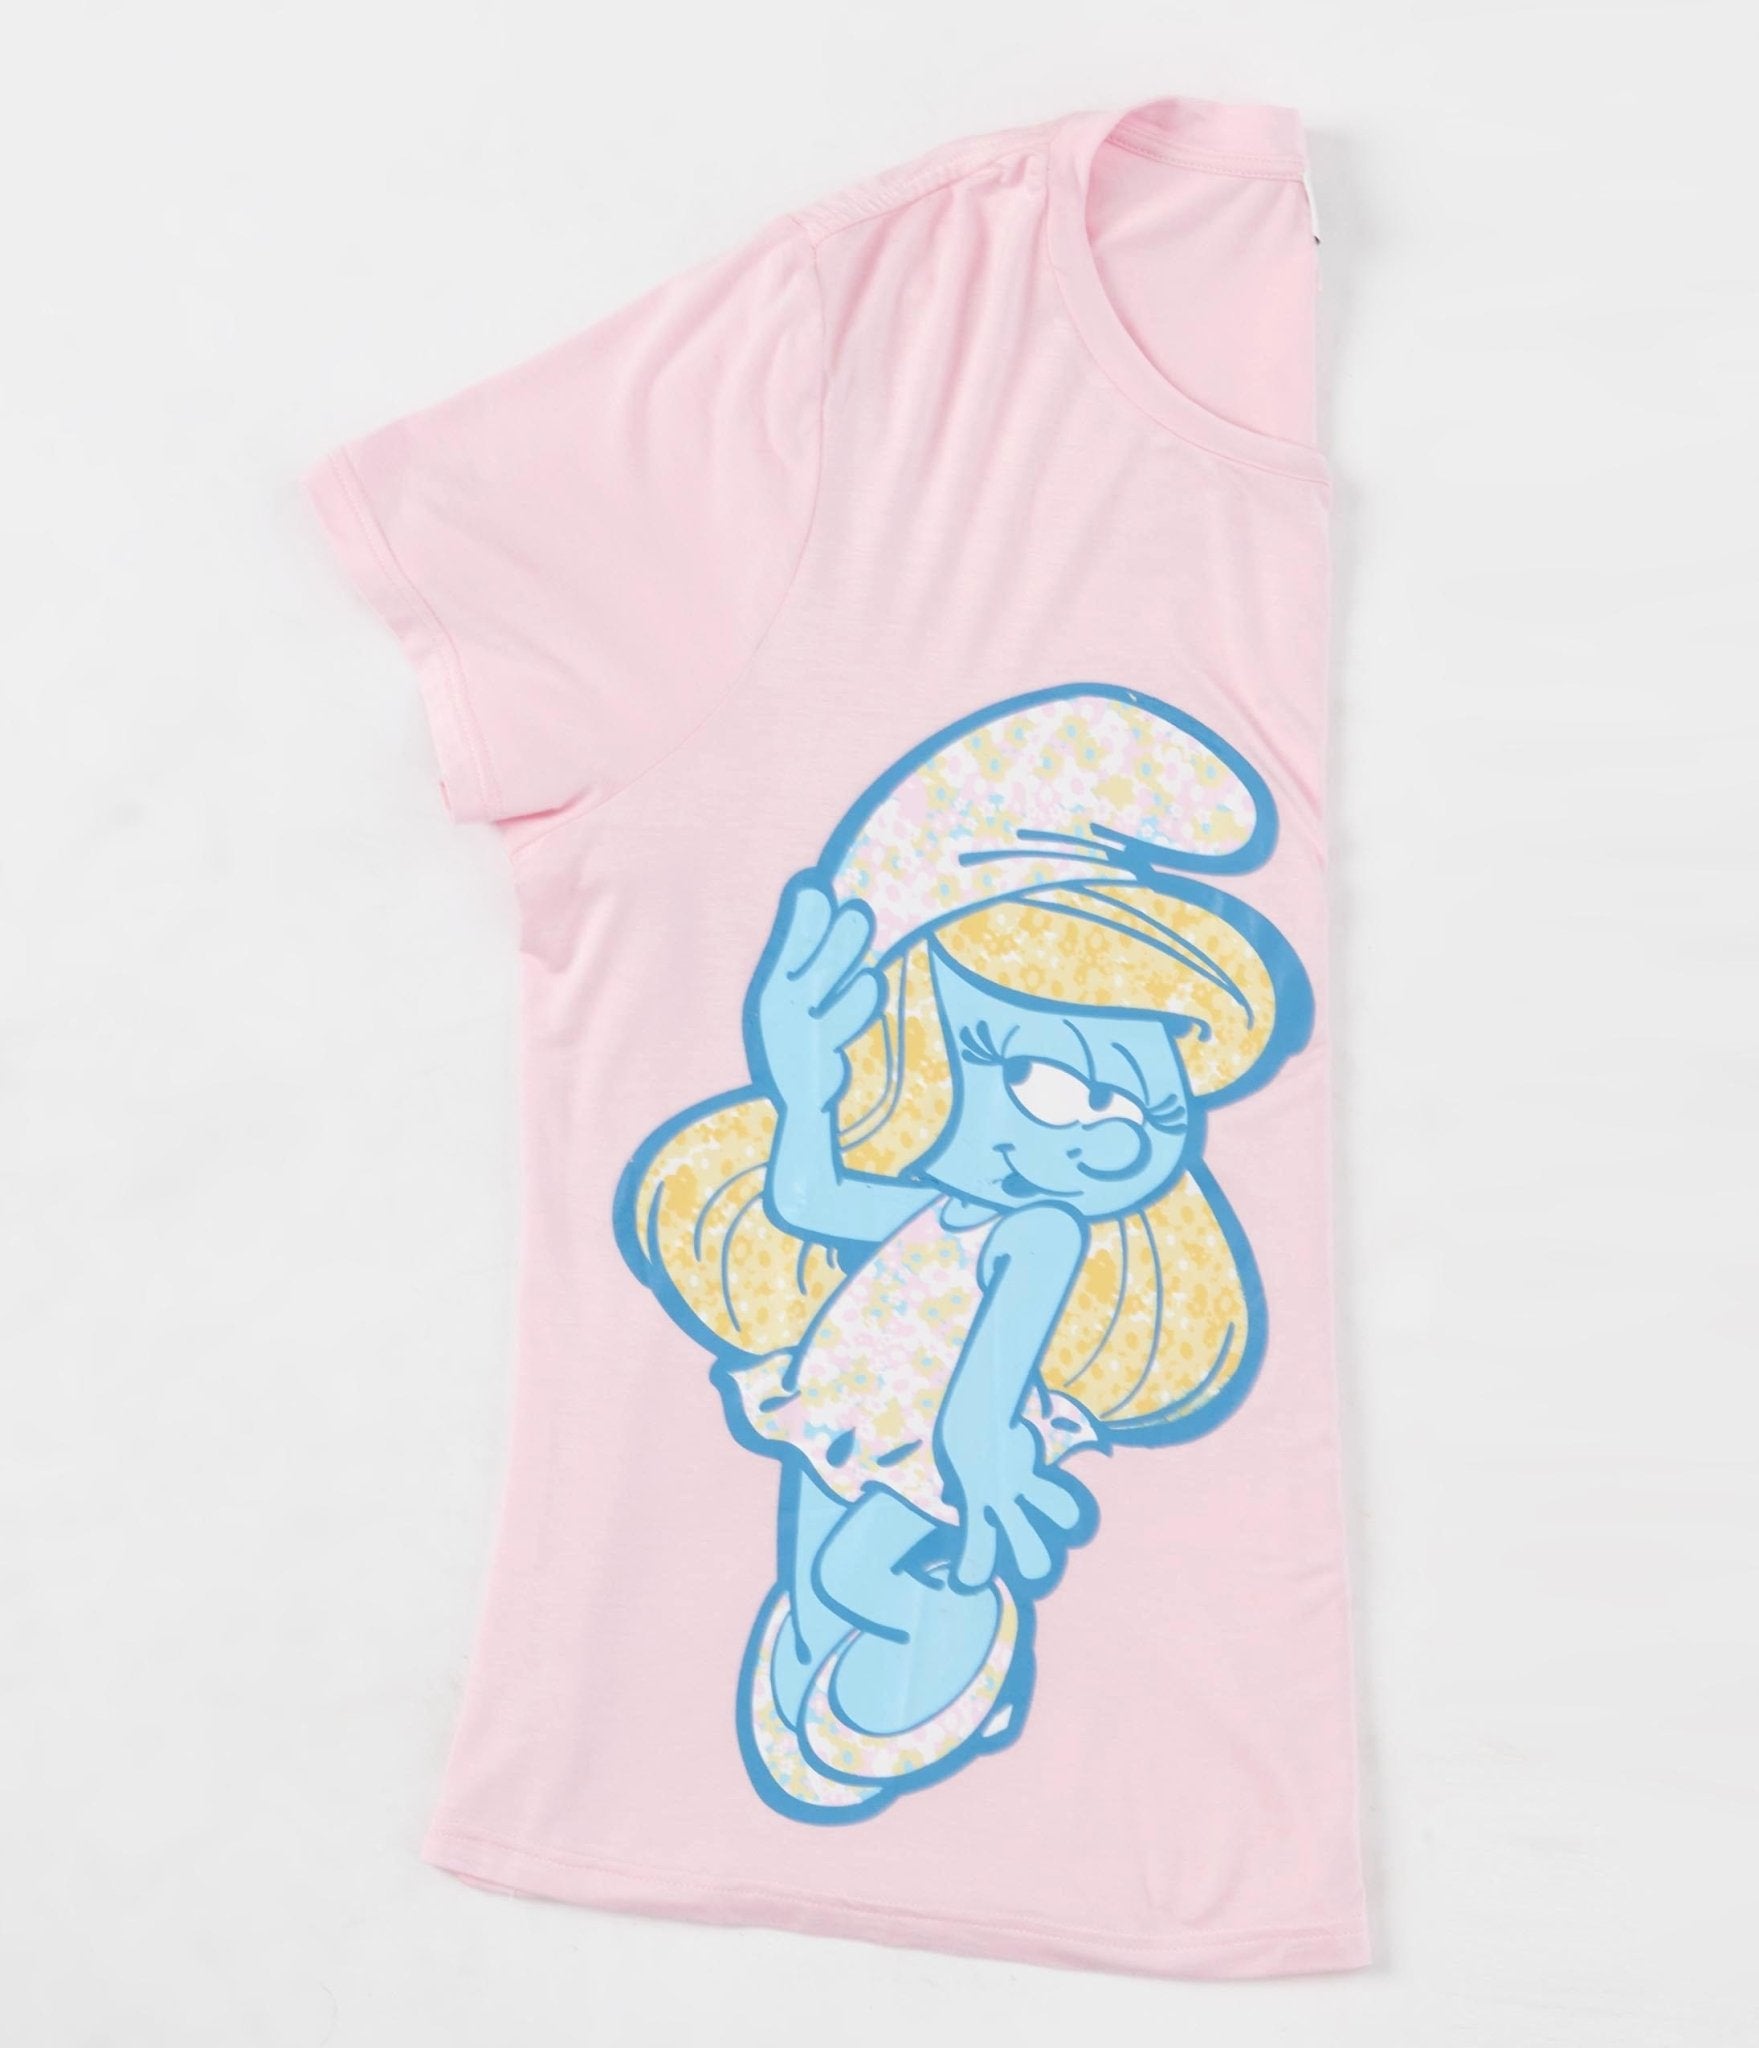 The Smurfs x Unique Vintage Pink Smurfs Fitted Tee - Unique Vintage - Womens, GRAPHIC TEES, TEES